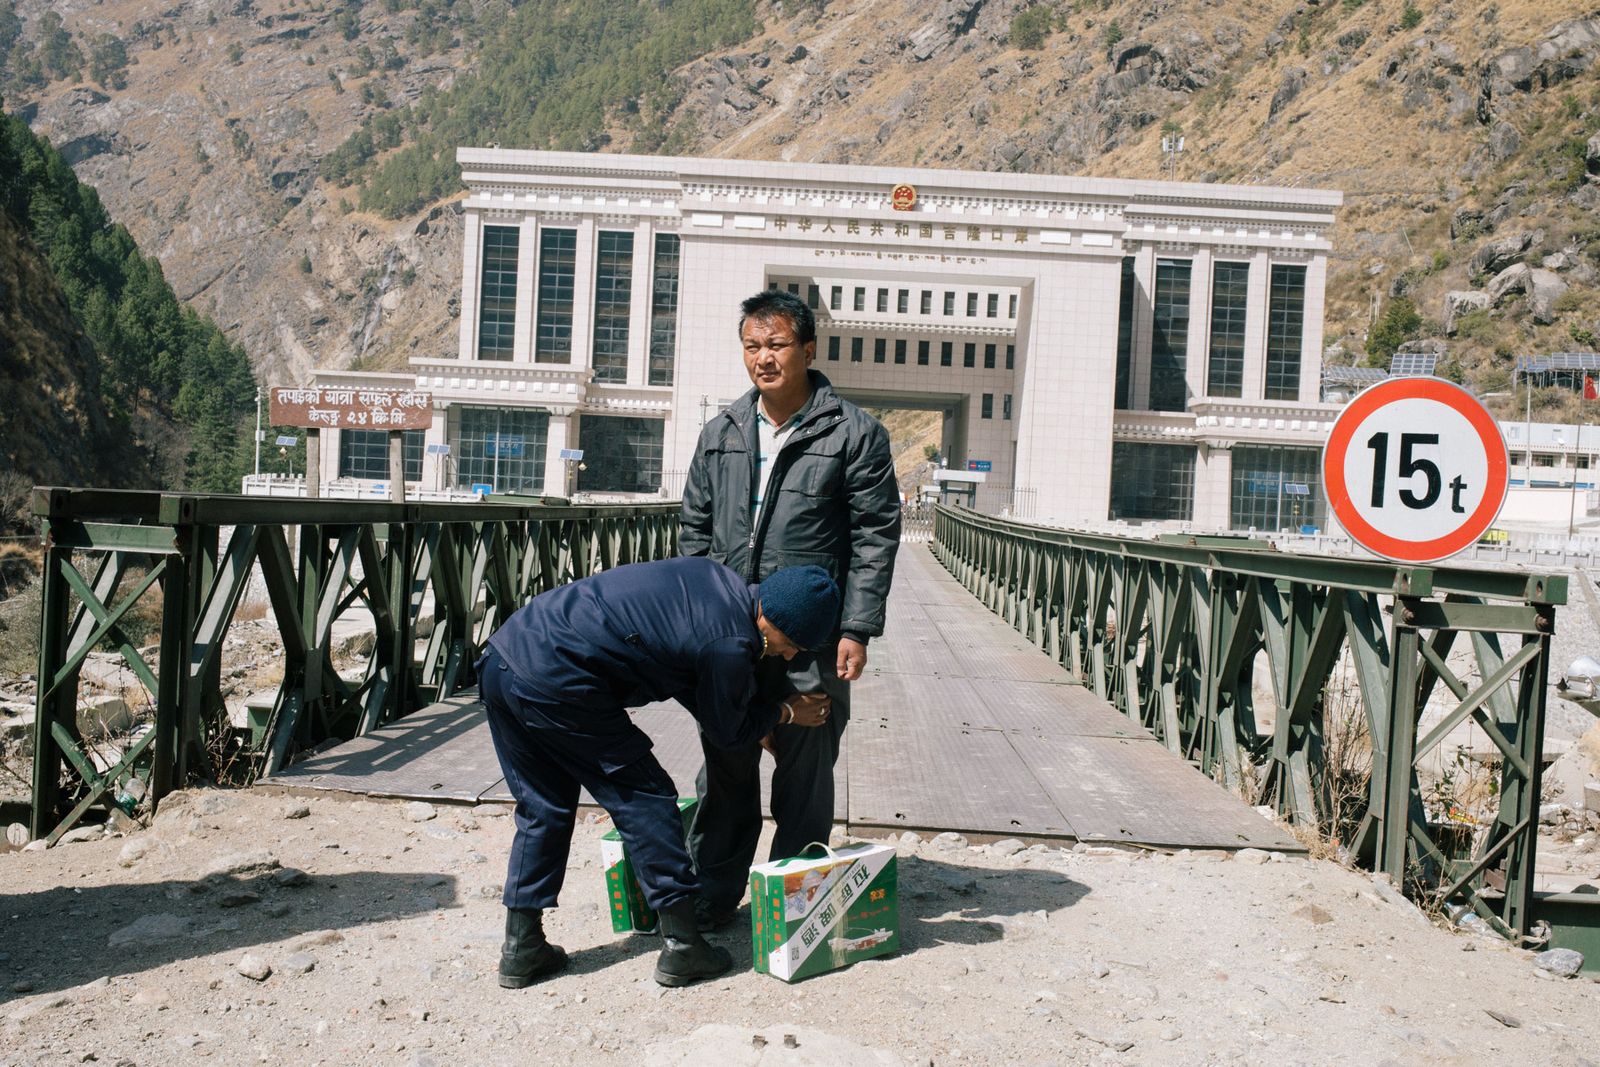 © Prasiit Sthapit - Image from the The New Silk Road photography project